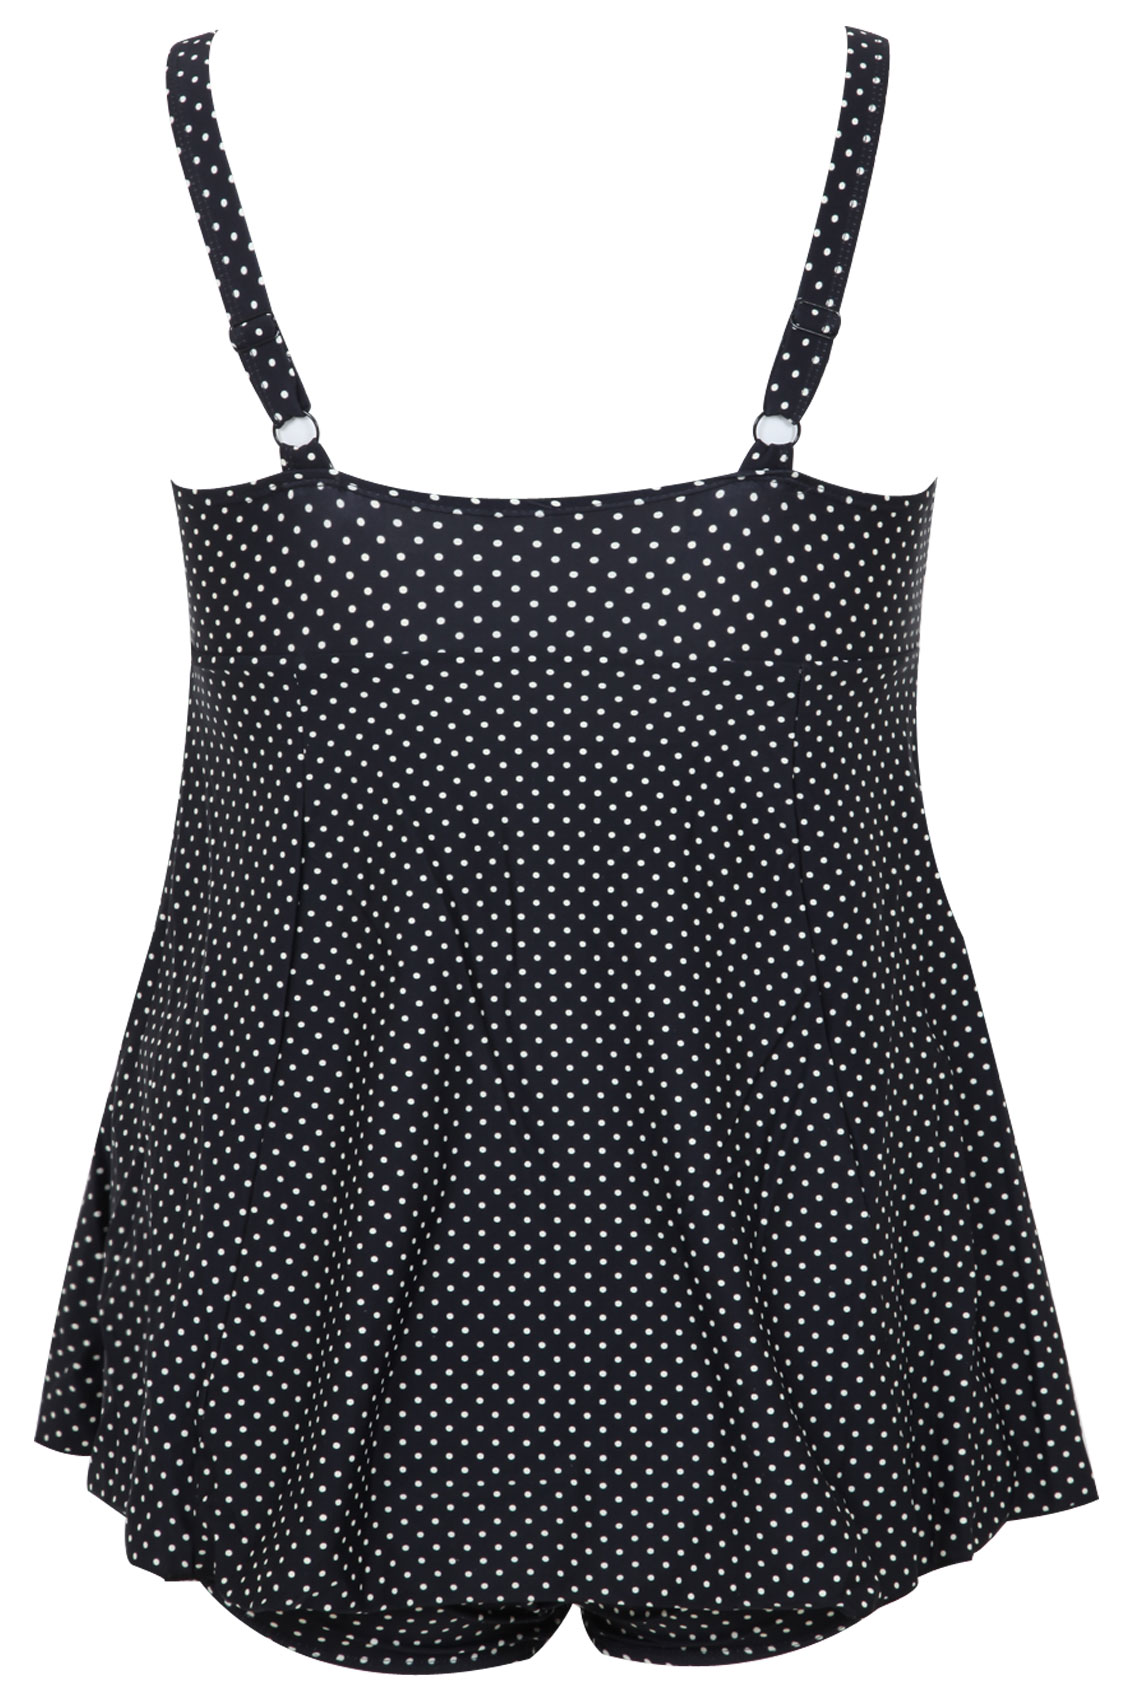 Black Polka Dot Skirted Swimsuit With TUMMY CONTROL Plus Size 16,18,20 ...